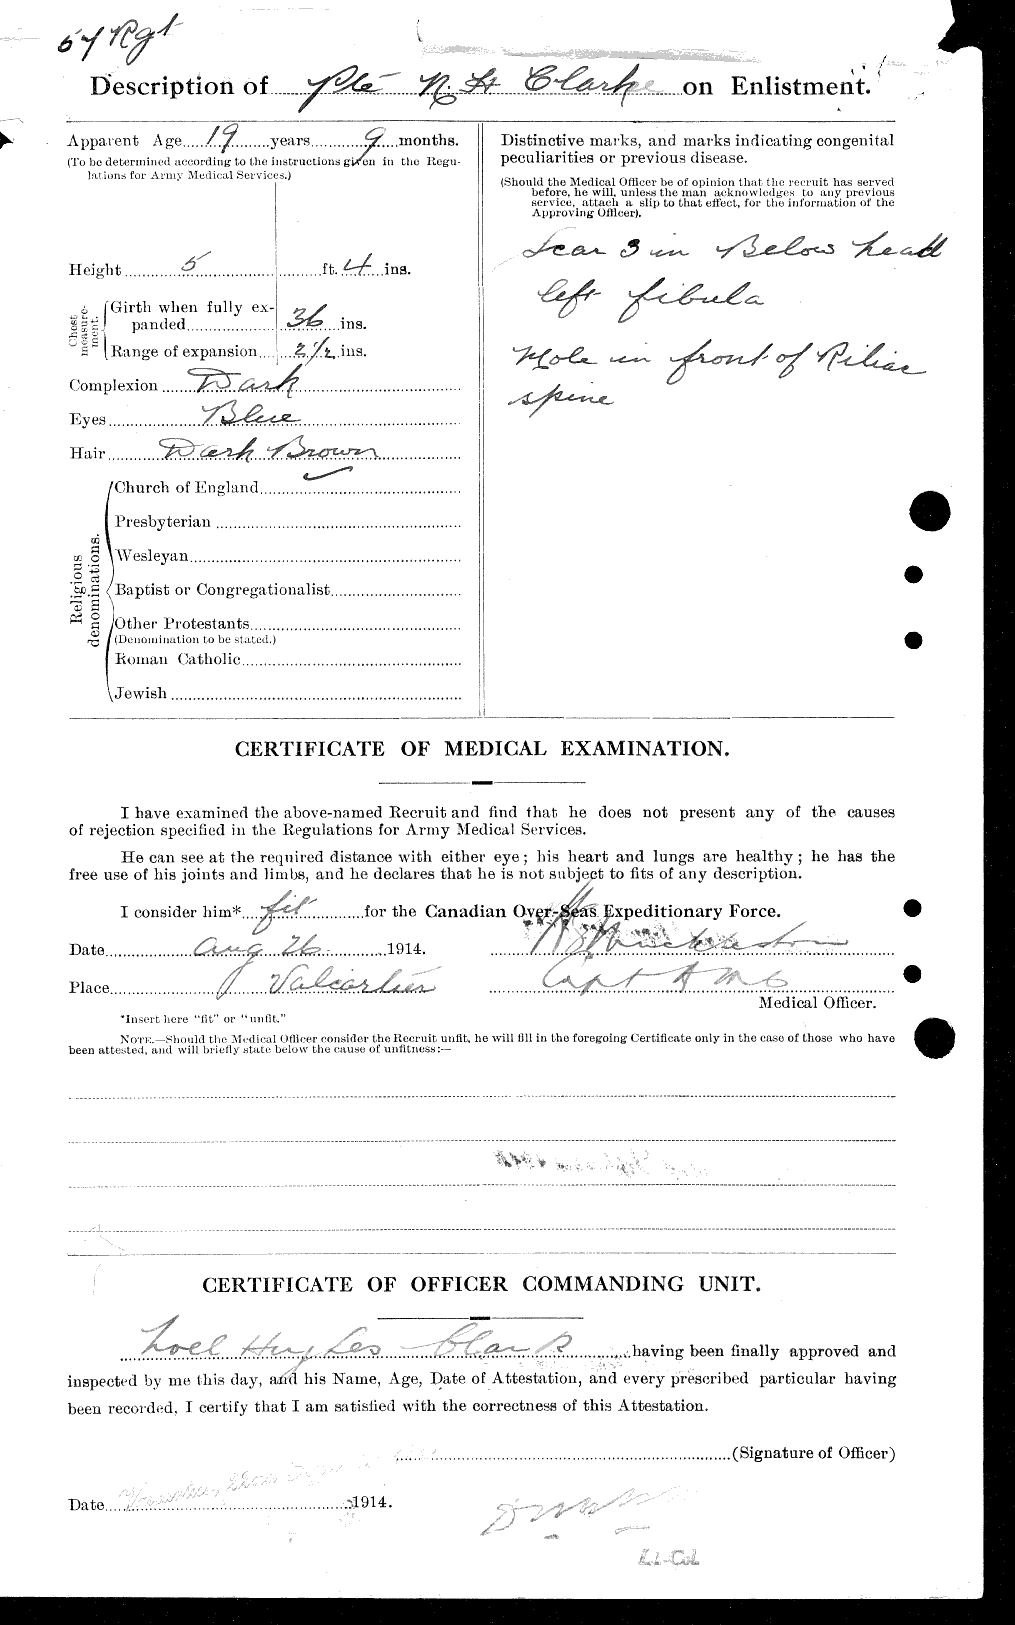 Personnel Records of the First World War - CEF 021204b